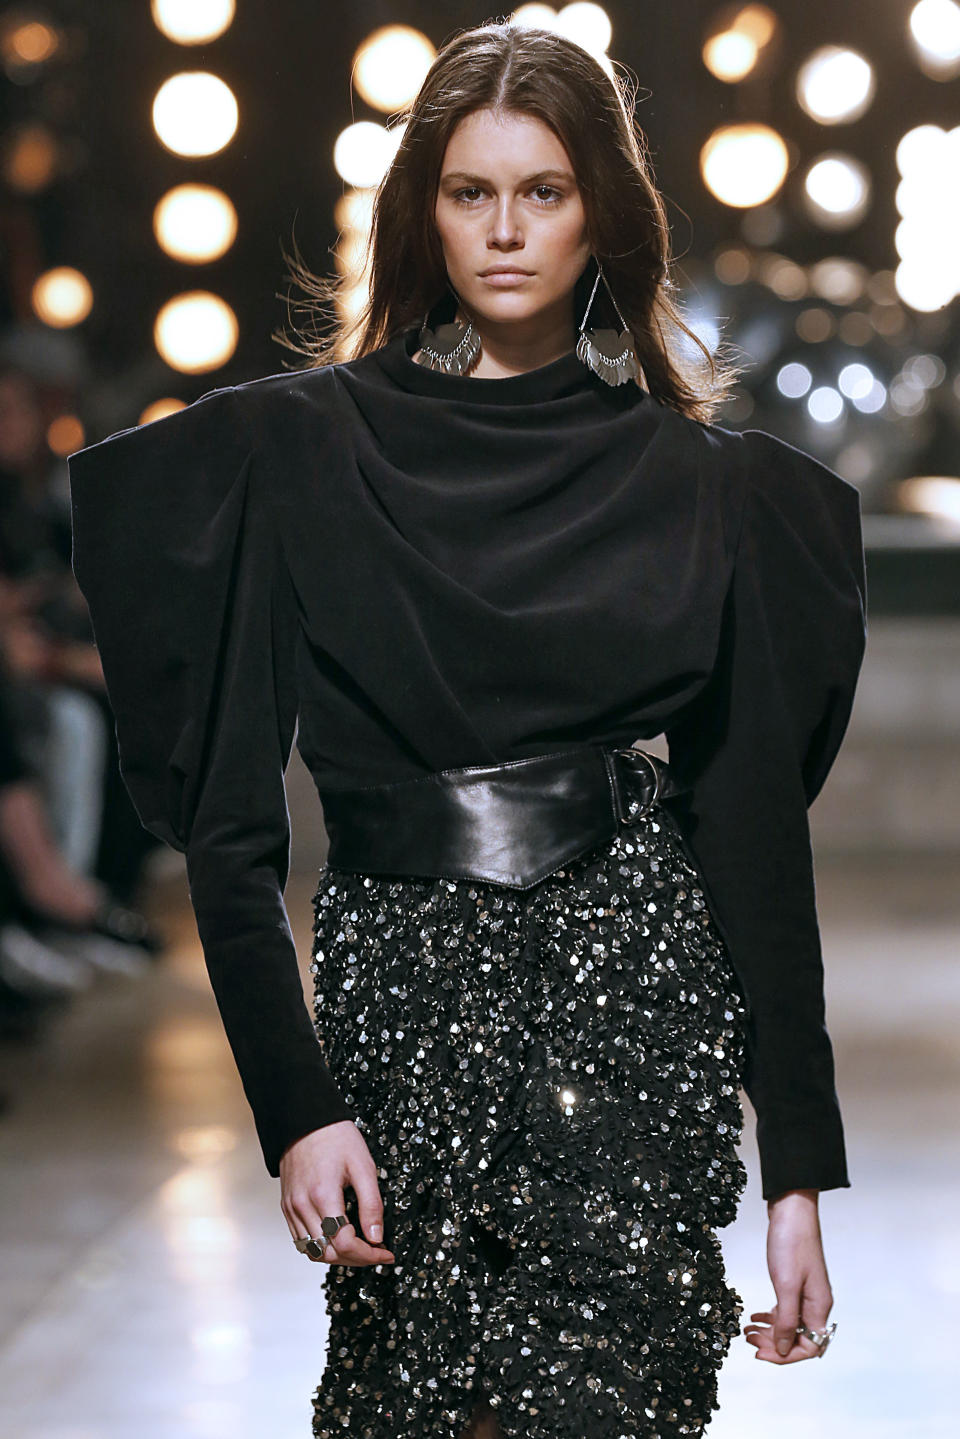 Kaia Gerber walks on the runway during the Isabel Marant Ready To Wear Fashion Show during Paris Fashion Week F/W 2019 held in Paris, France on February 28, 2019. (Photo by Jonas Gustavsson/Sipa USA)



